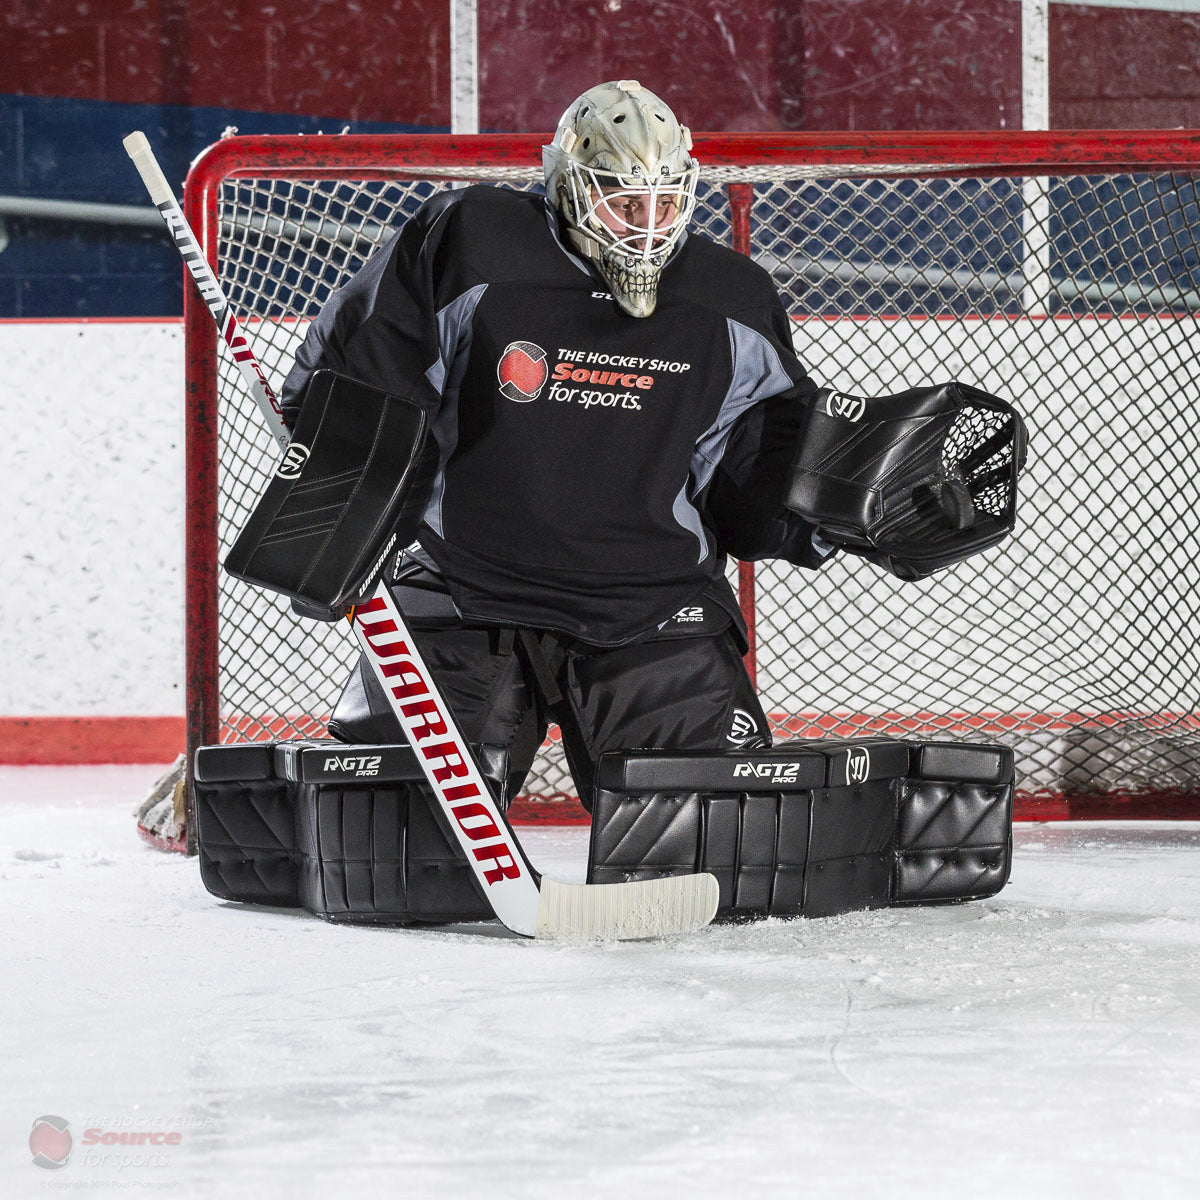 Warrior GT2 Pro Leg Pad Review The Hockey Shop Source